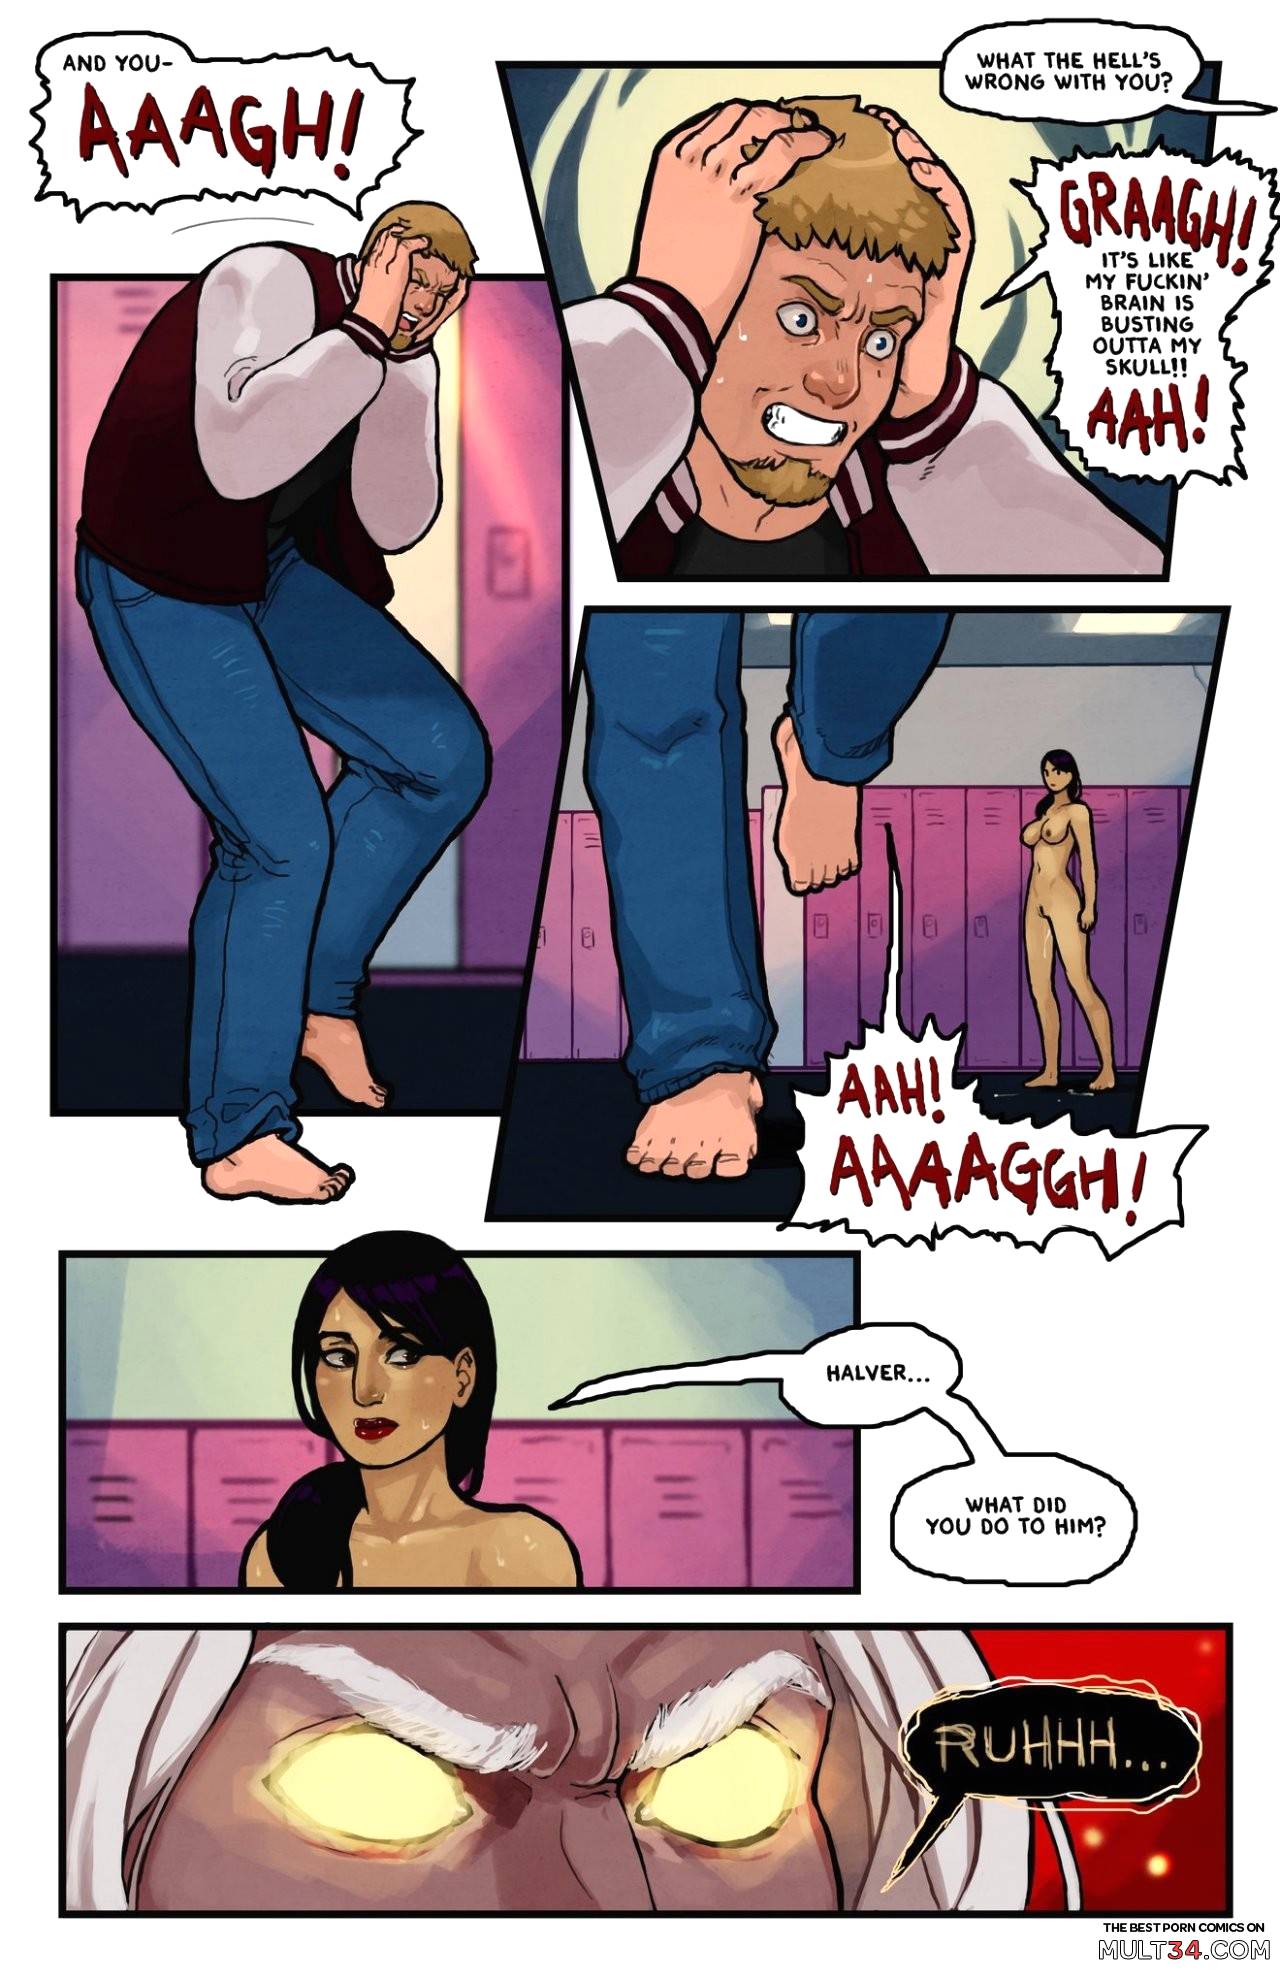 This Romantic World 4 page 9